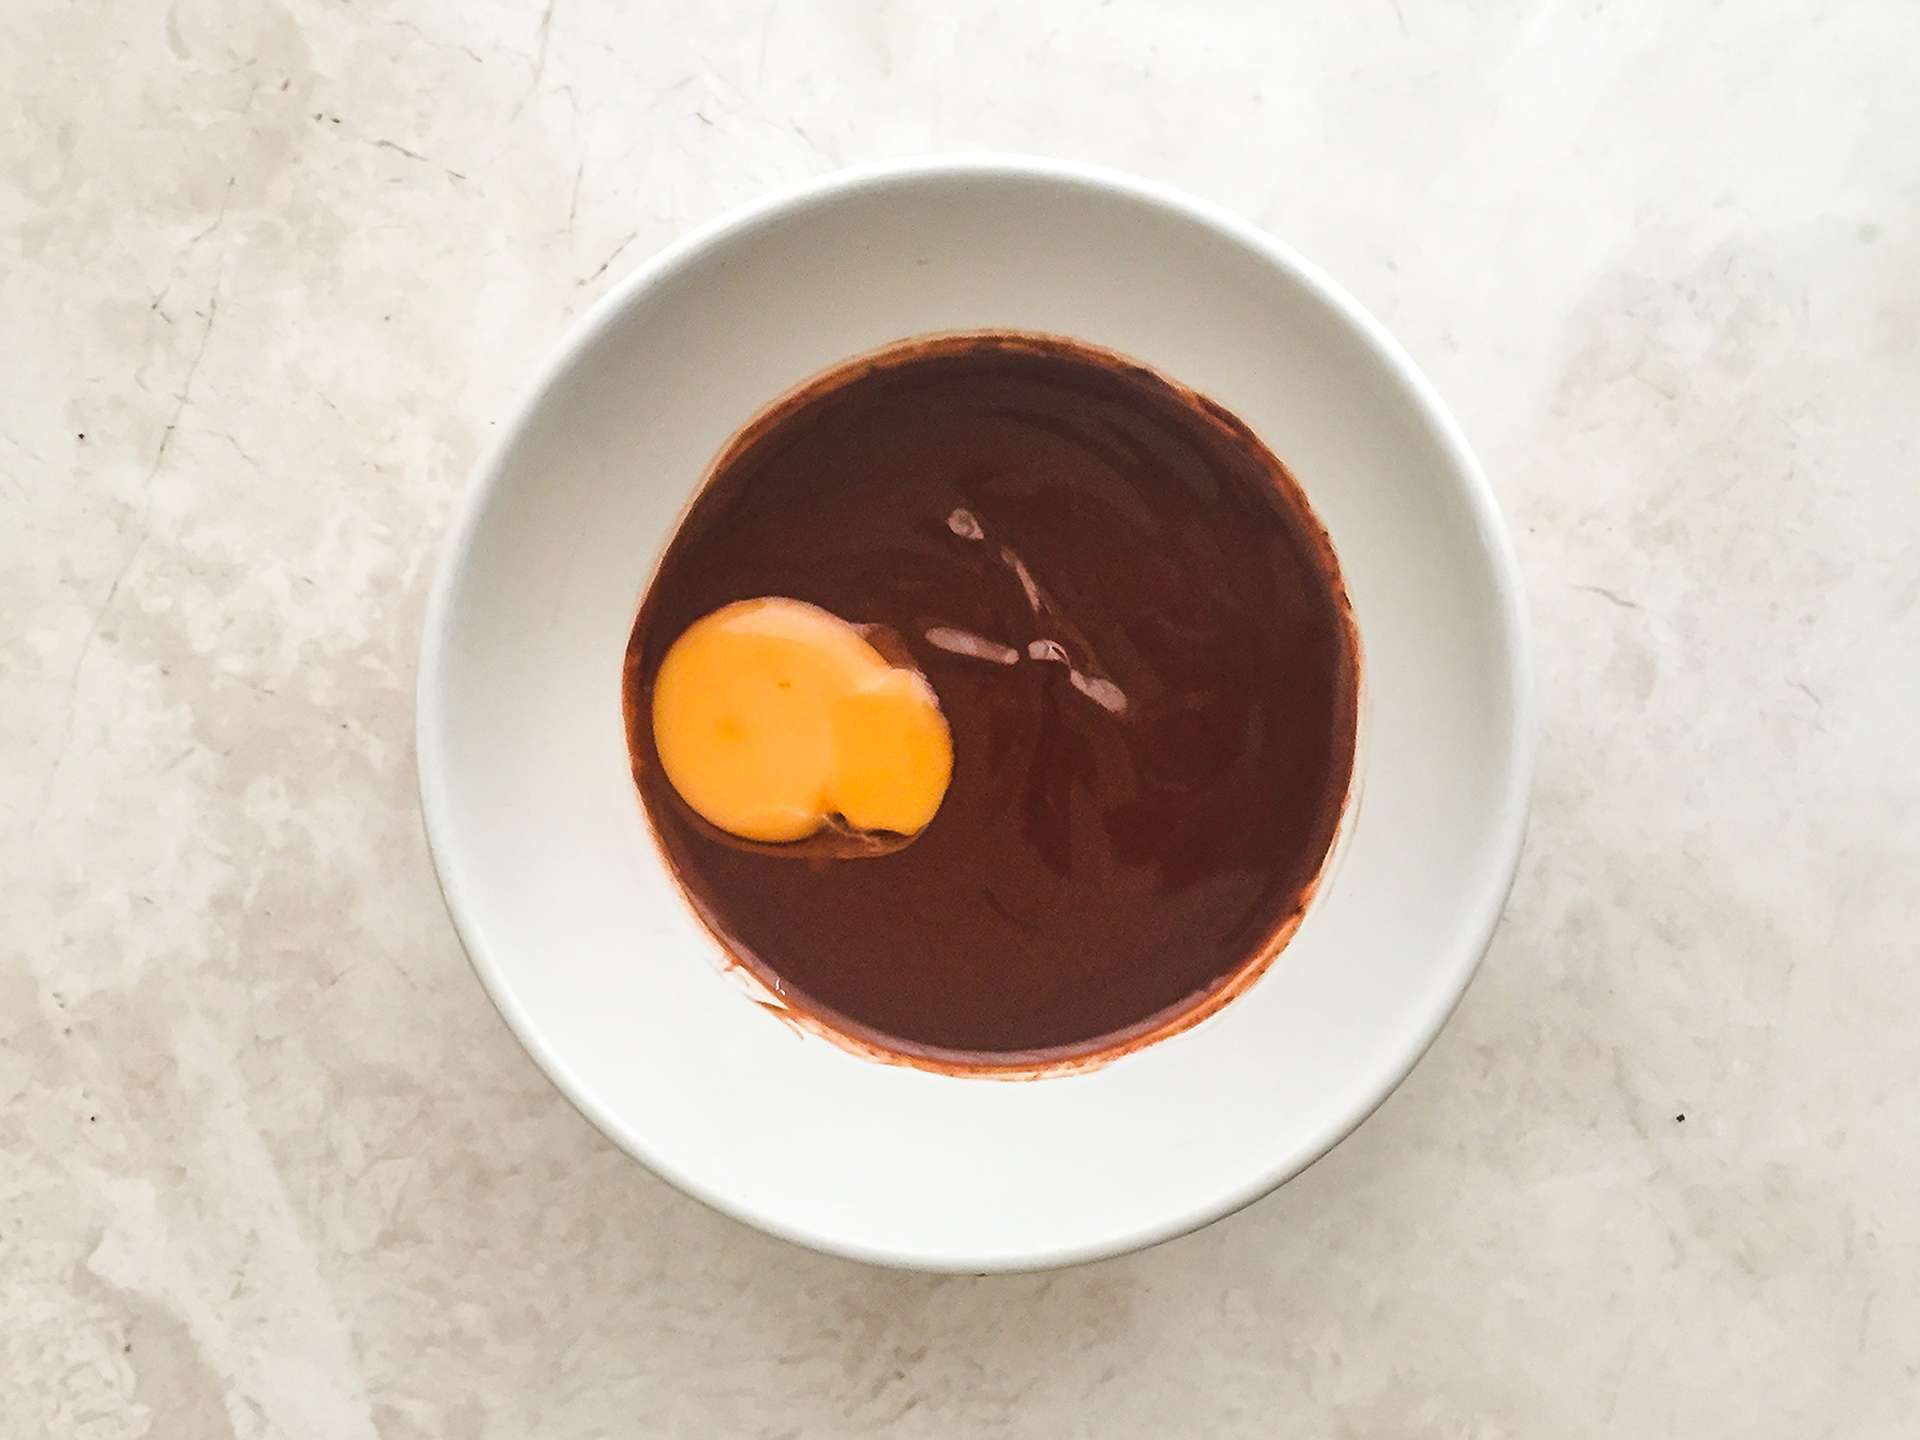 melted chocolate with egg yolk